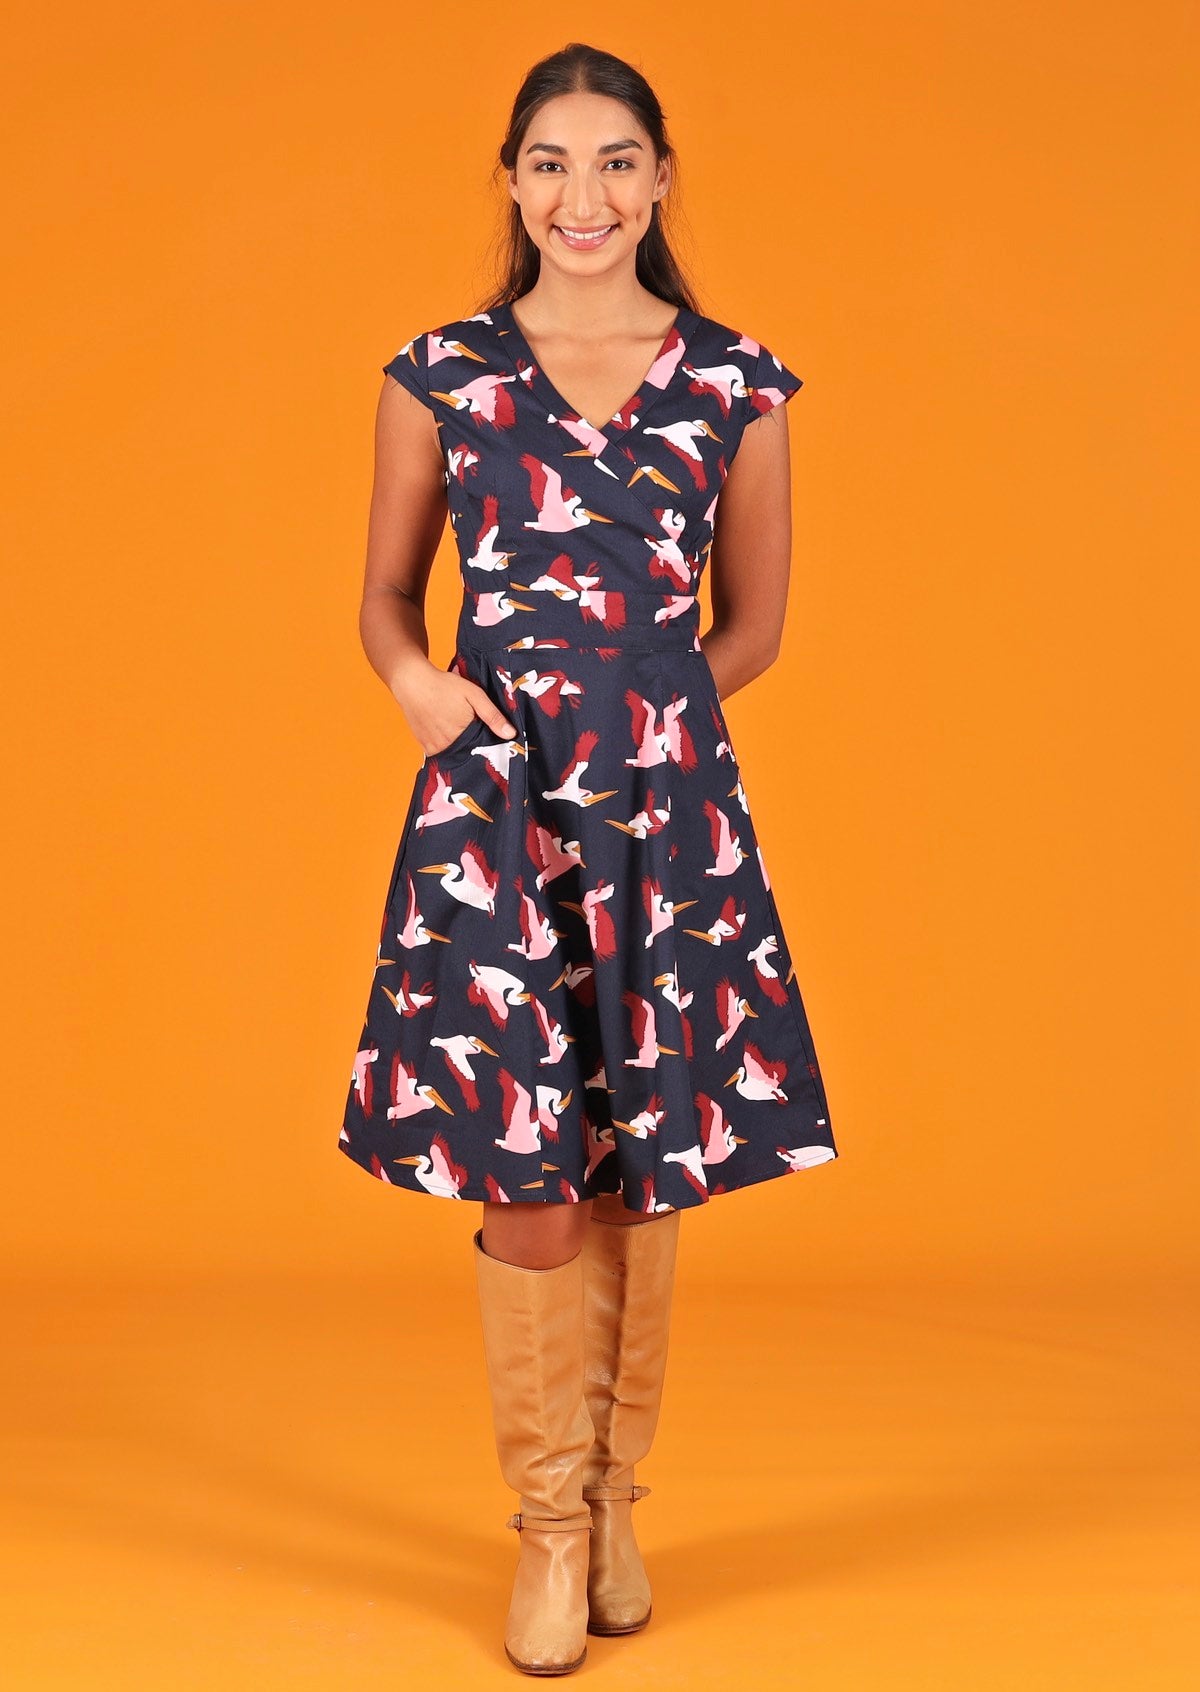 Woman wearing  retro style cotton dress with pockets